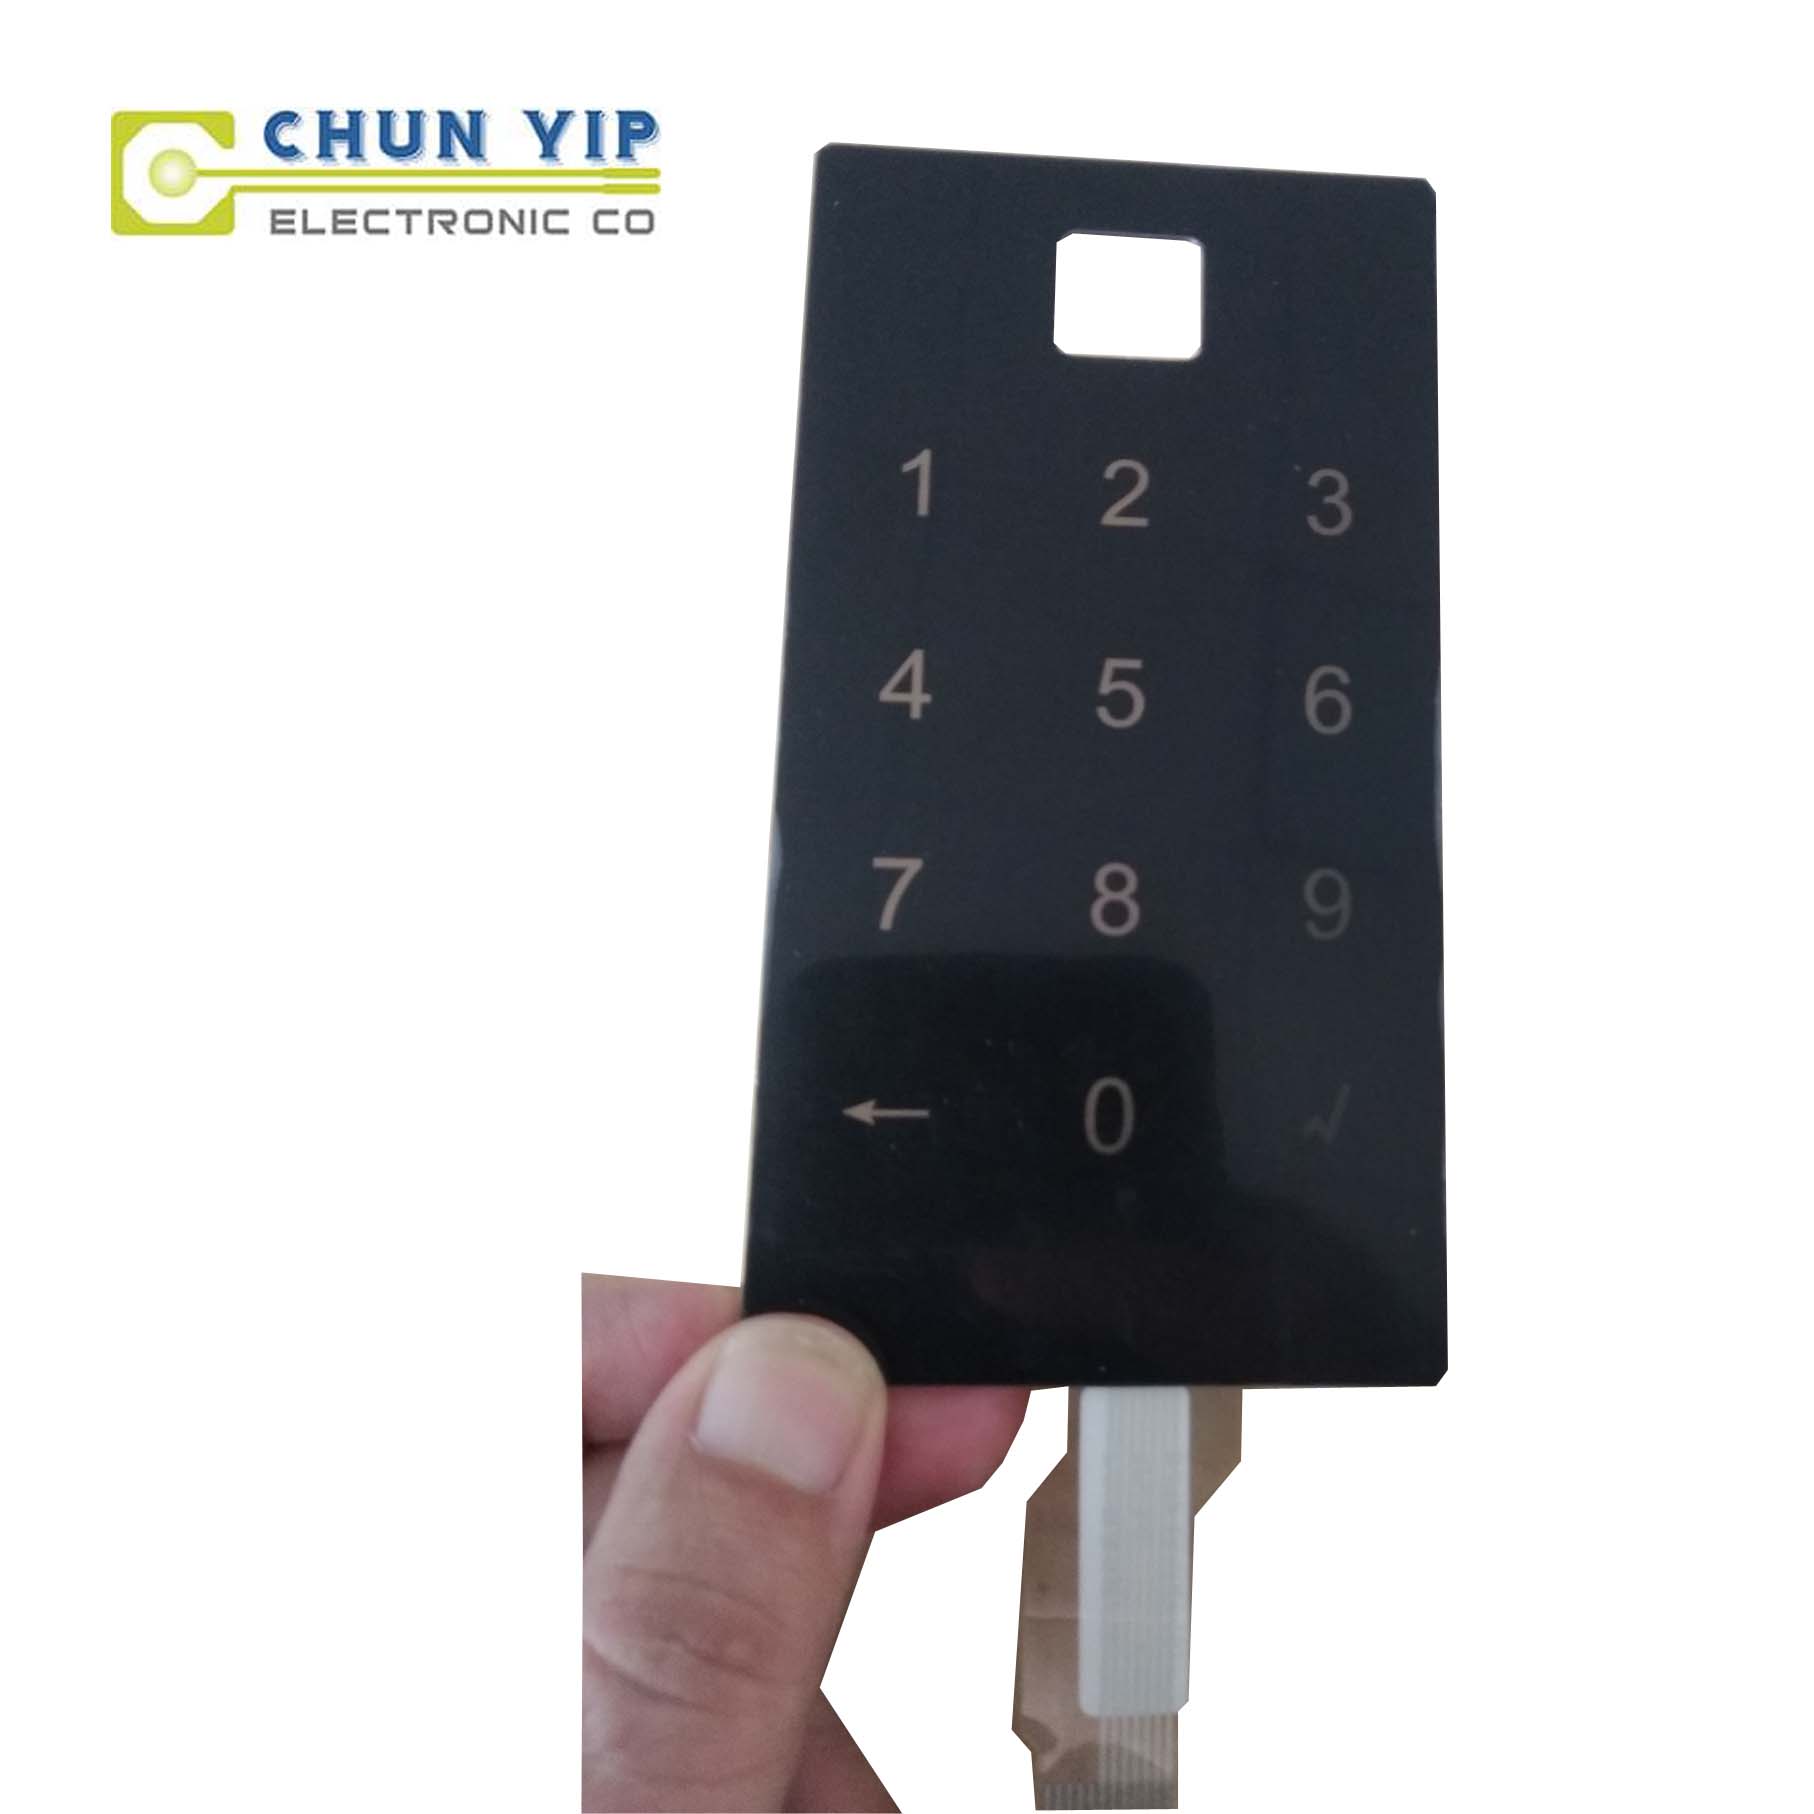 Gi Corrugated Sheet Membrane Keyboard For Beckhoff -
 Capacitance Switch, Touch Membrane Switch, Pet Membrane Switch – Chun Yip